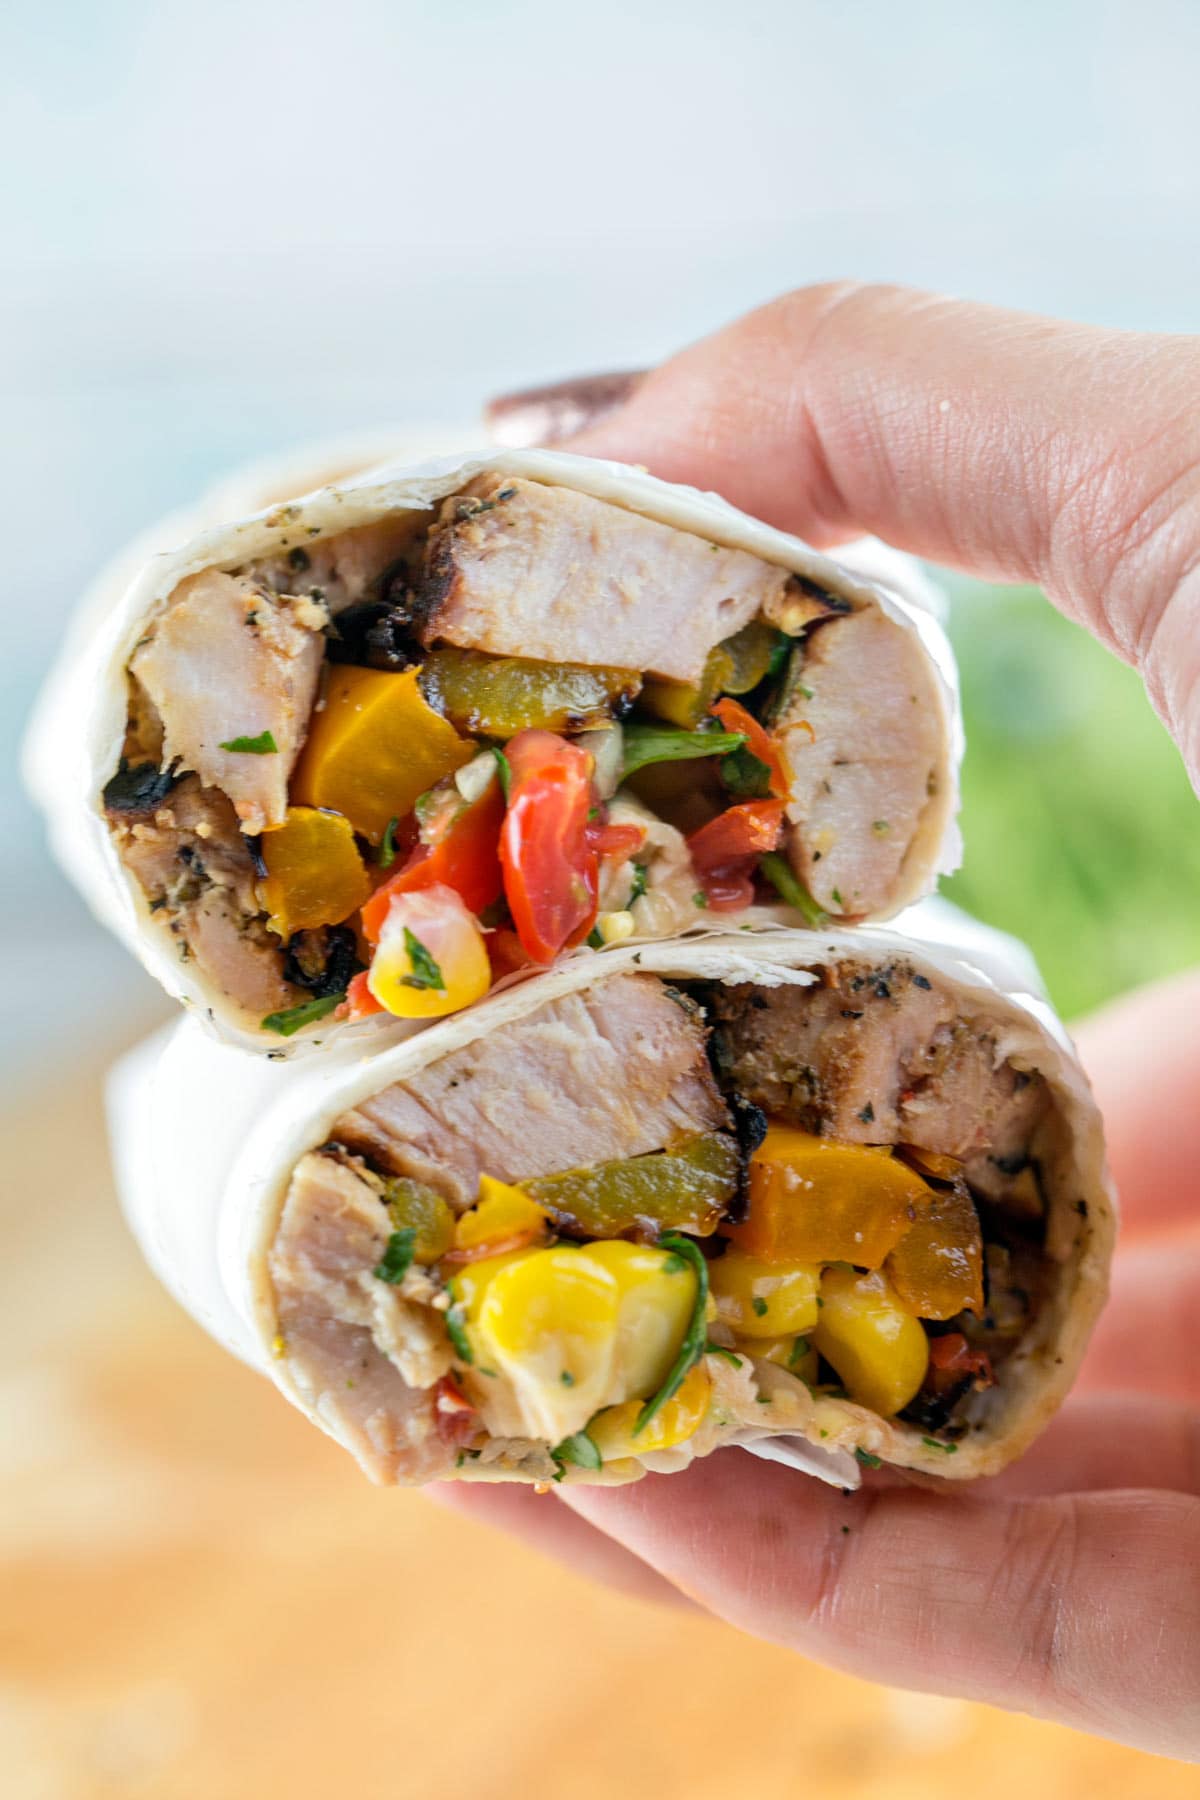 hand holding two halves of a wrap showing the pork and vegetables inside